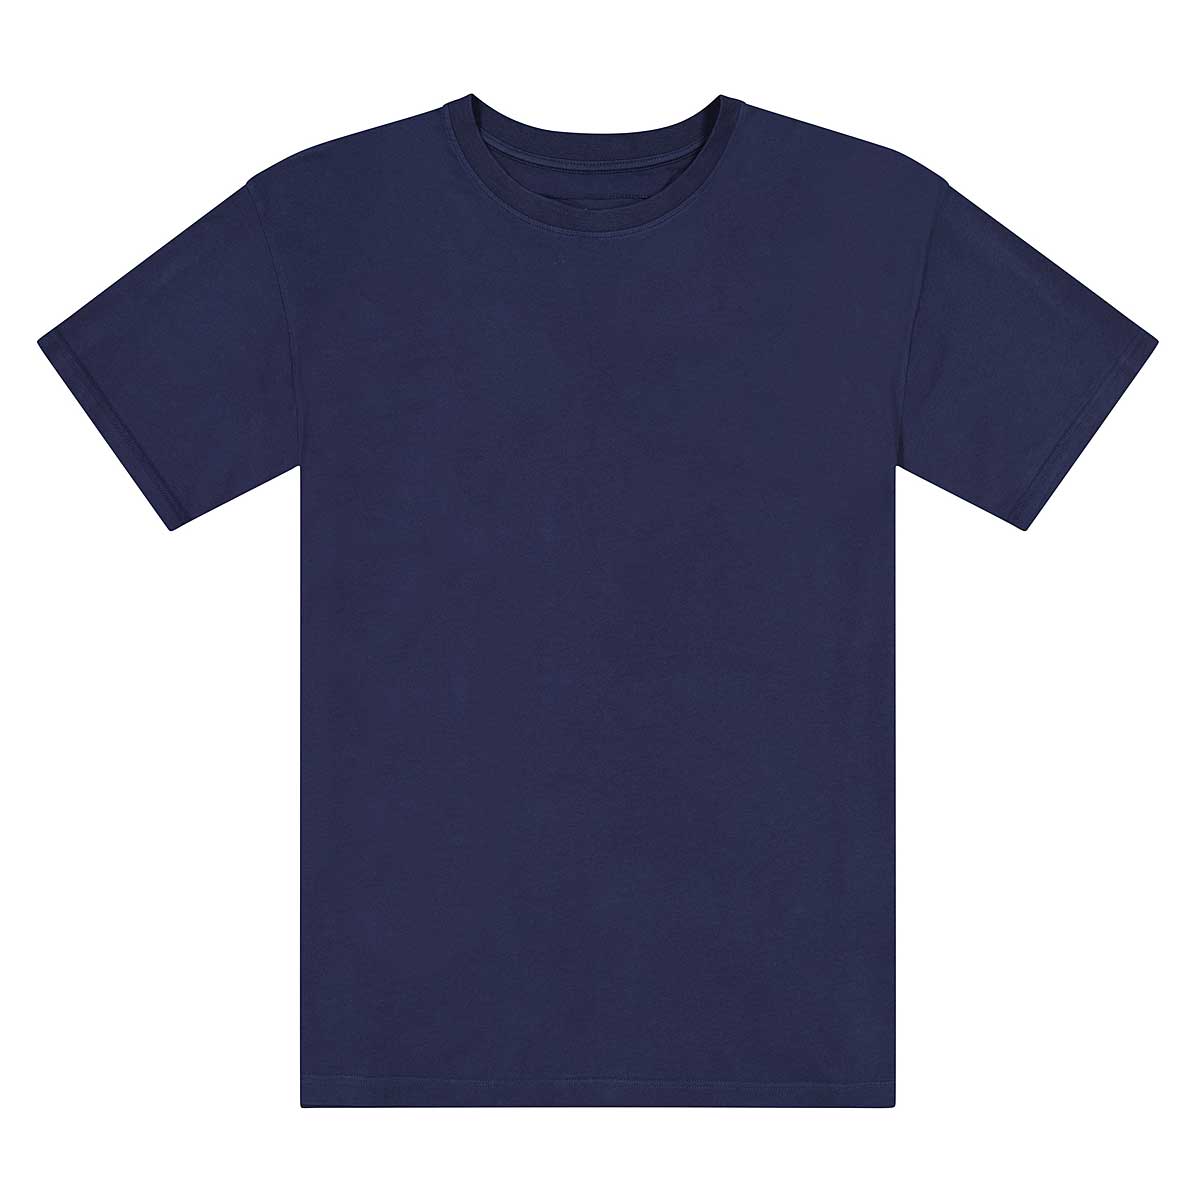 Moment Of Truth Lux Tee, Peacoat